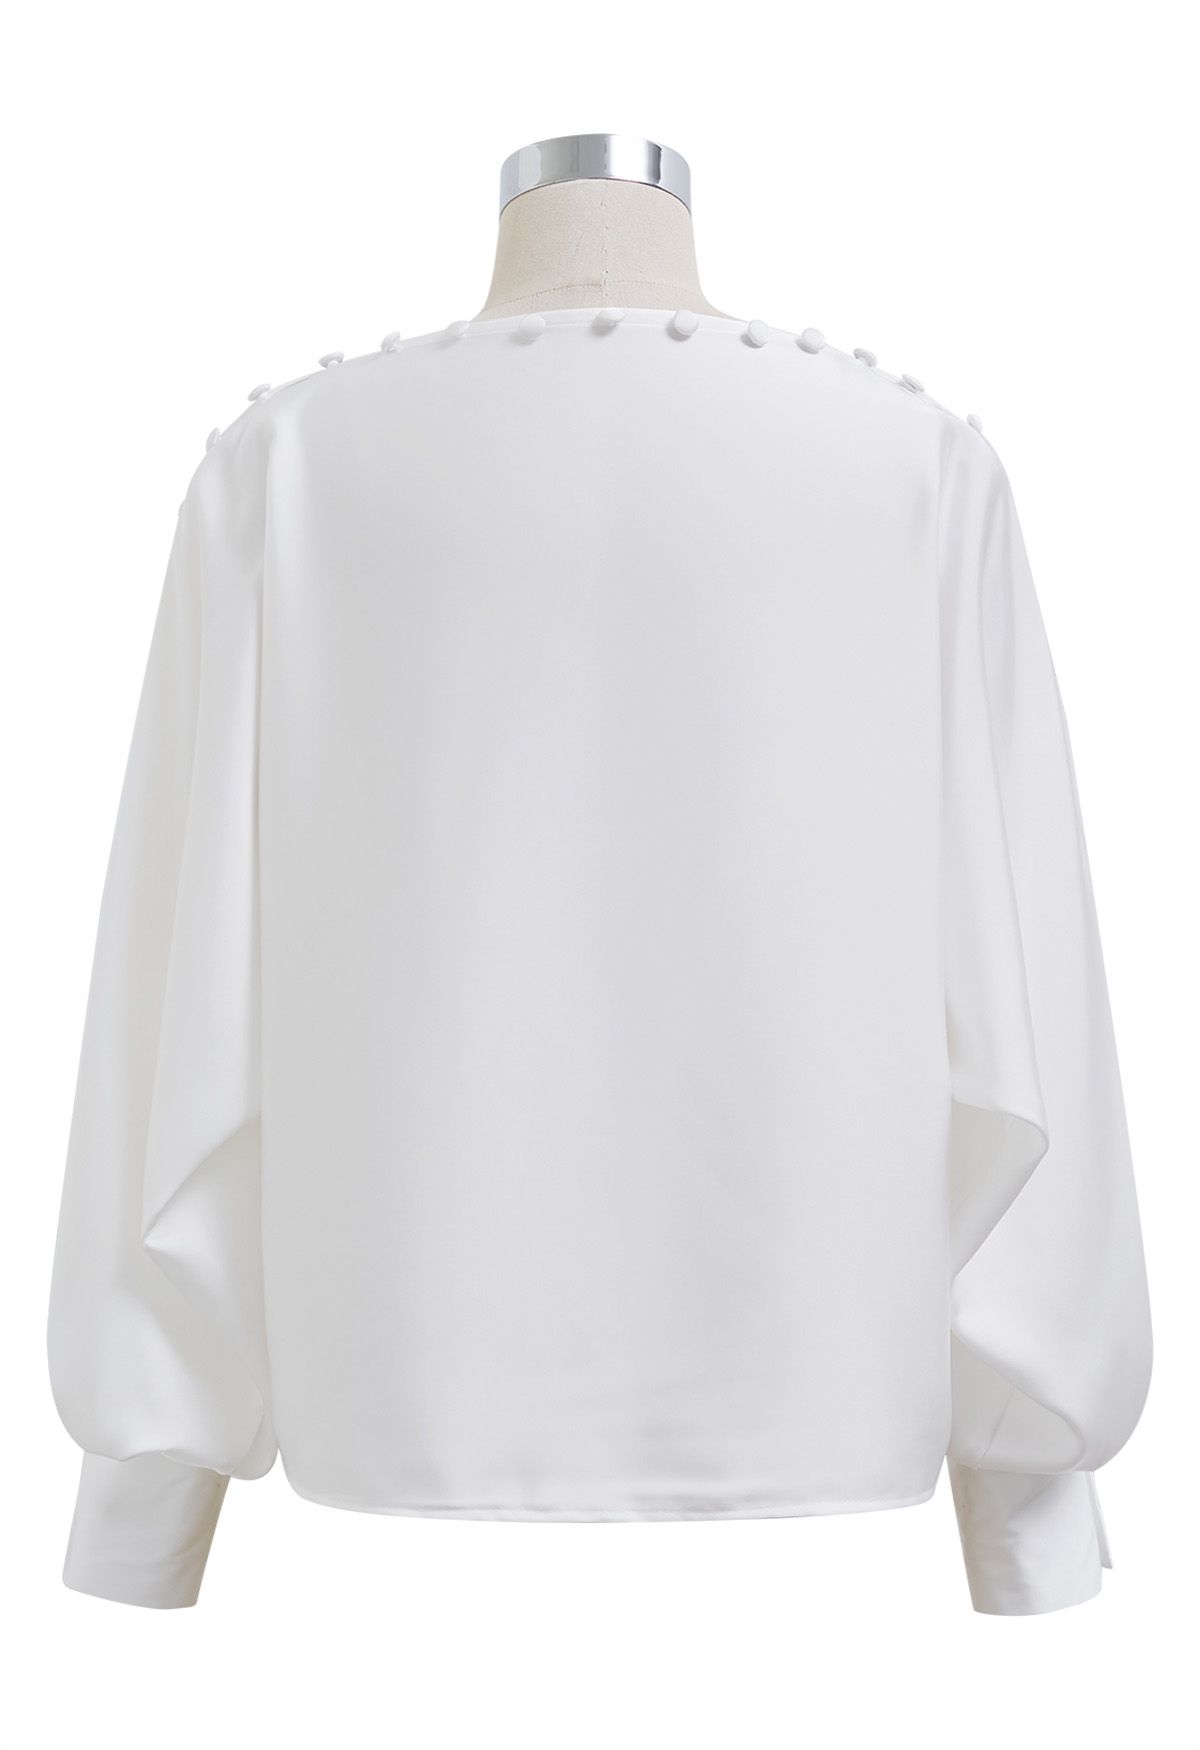 Buttoned Boat Neck Batwing Sleeves Satin Top in White